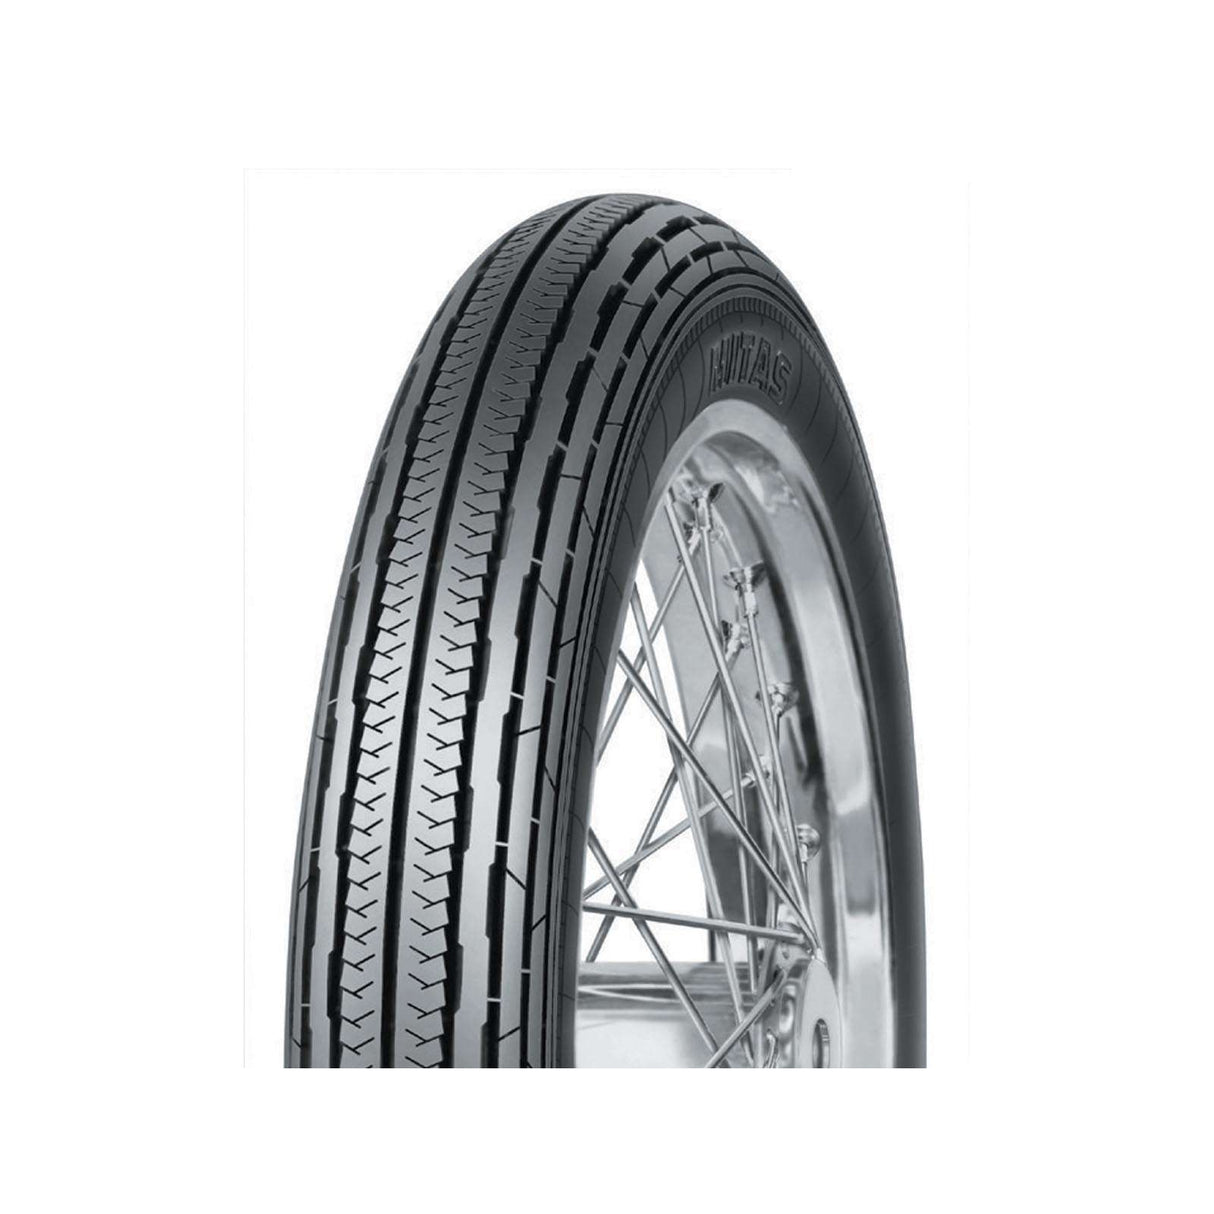 2.50-16 H04 Classic Reinf. Mitas Highway Tyre